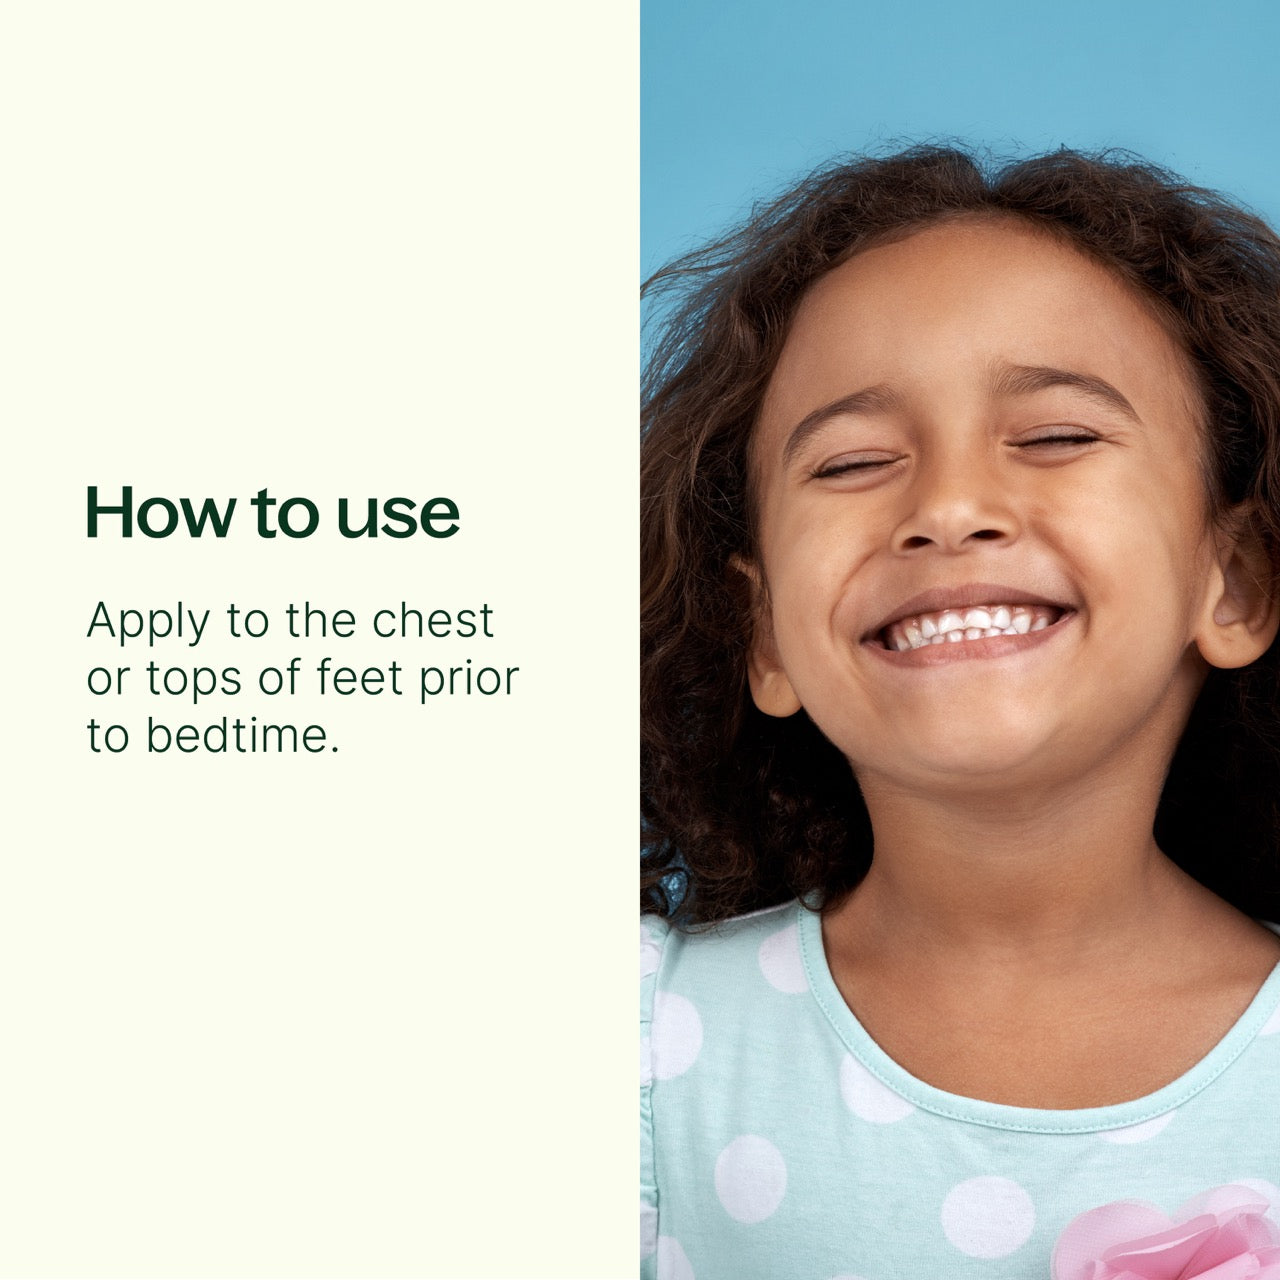 How to use Sweet Slumber KidSafe Essential Oil Pre-Diluted Roll-On: Apply to the chest or tops of feet prior to bedtime. 